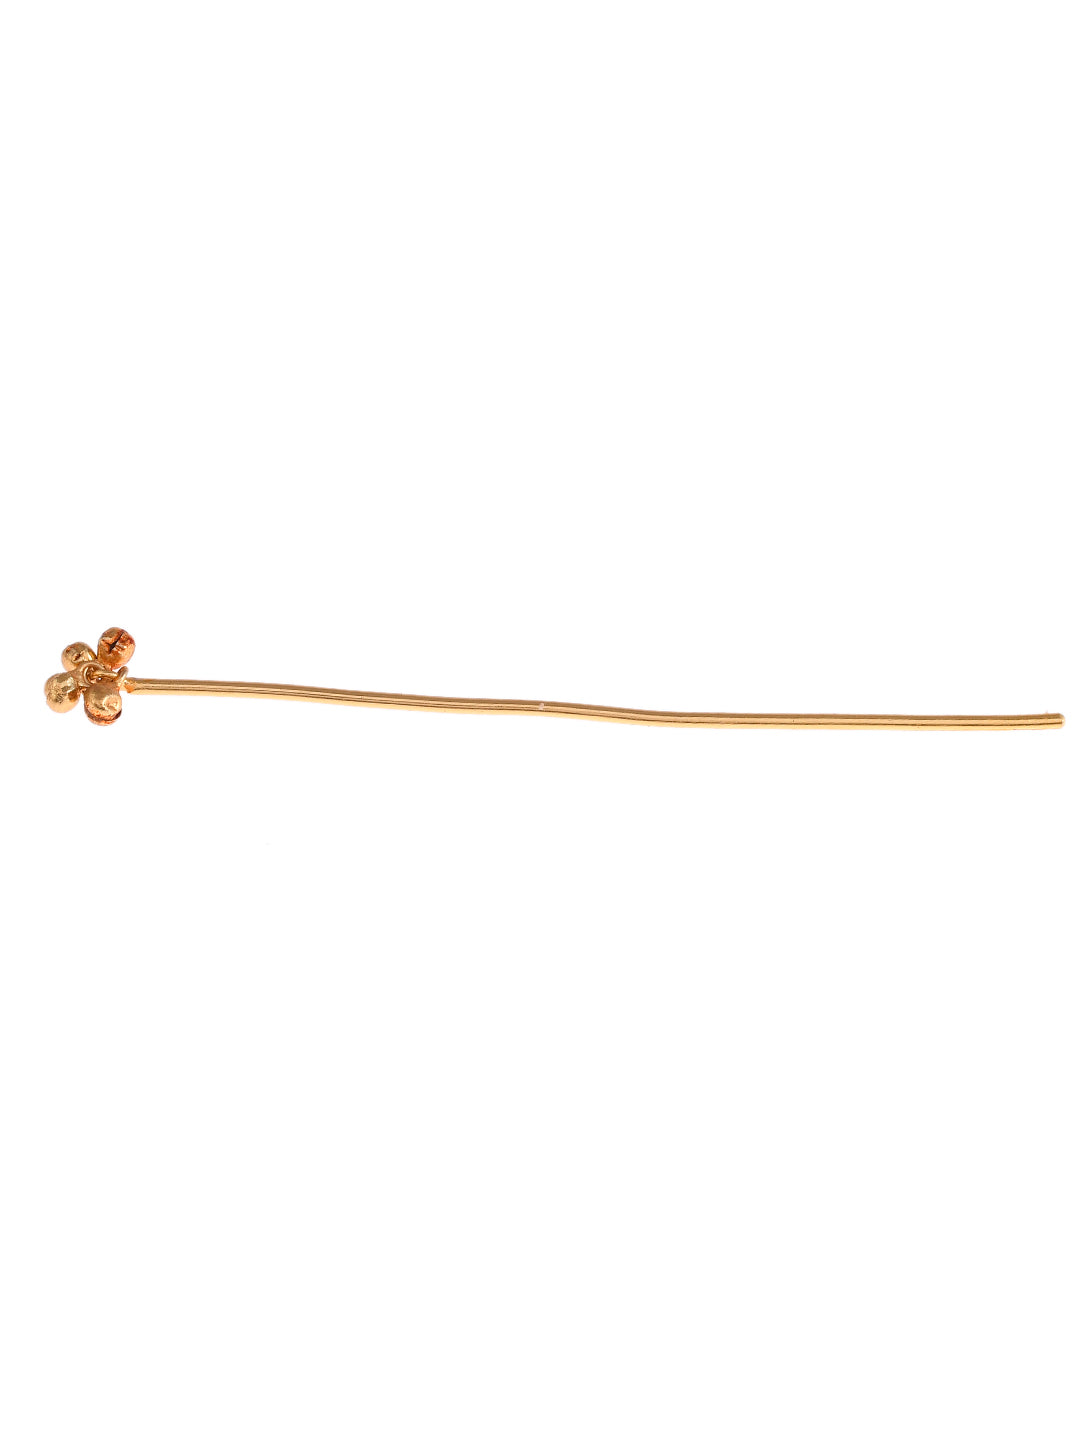 Gold Plated Ghungroo Beads Hair Stick